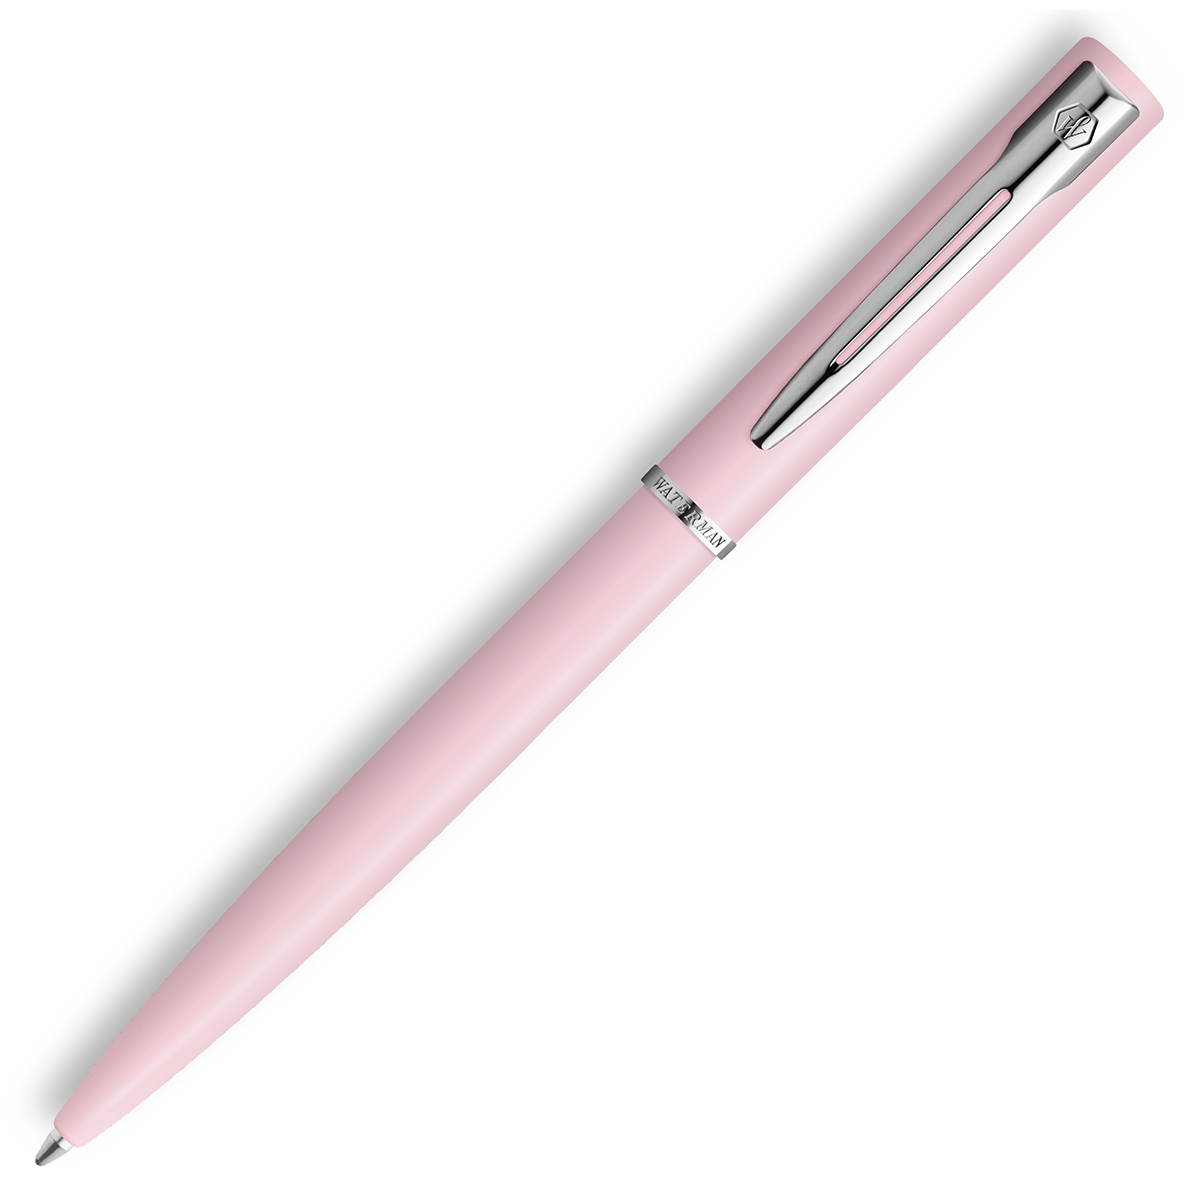 Allure Pastel Pink Ballpoint Pen in the group Pens / Fine Writing / Ballpoint Pens at Pen Store (128040)